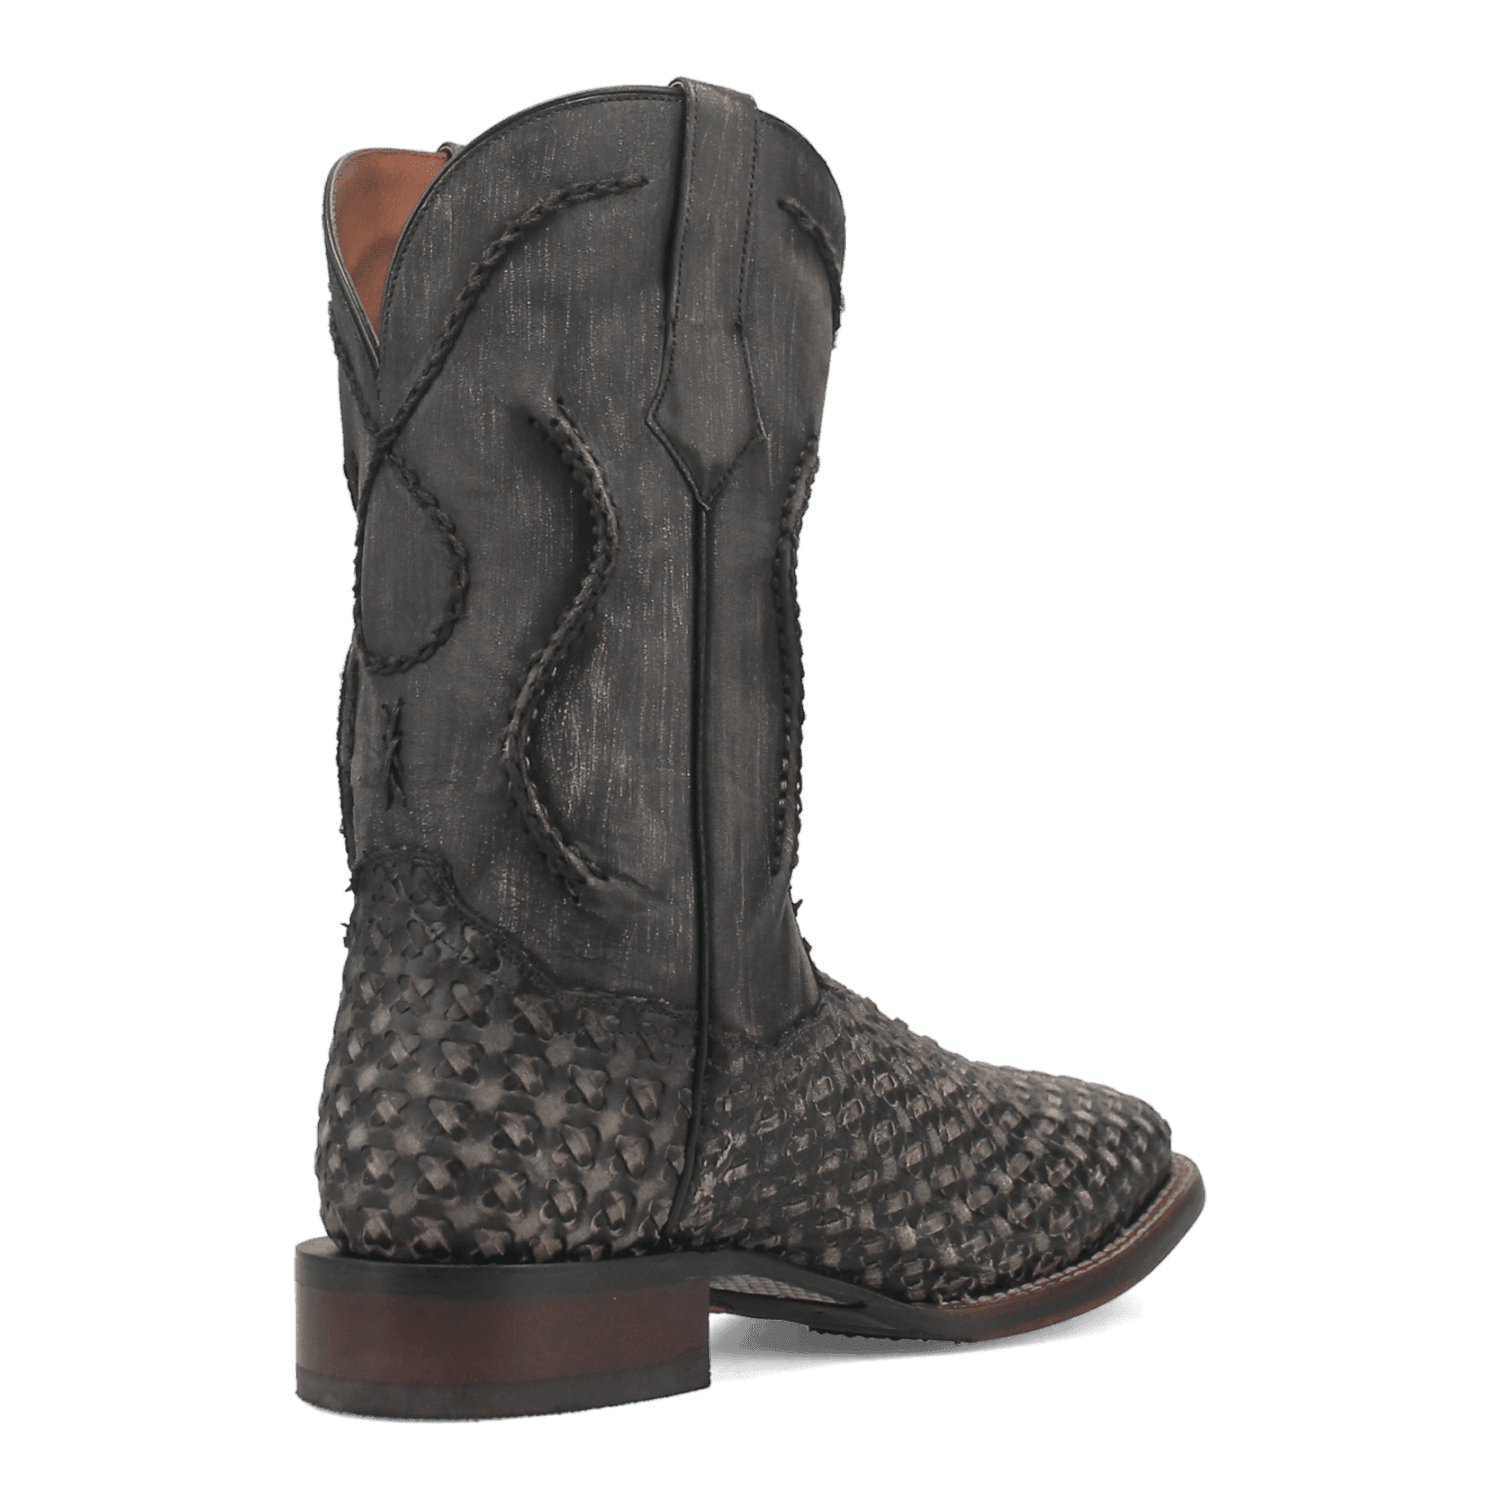 STANLEY LEATHER BOOT Image